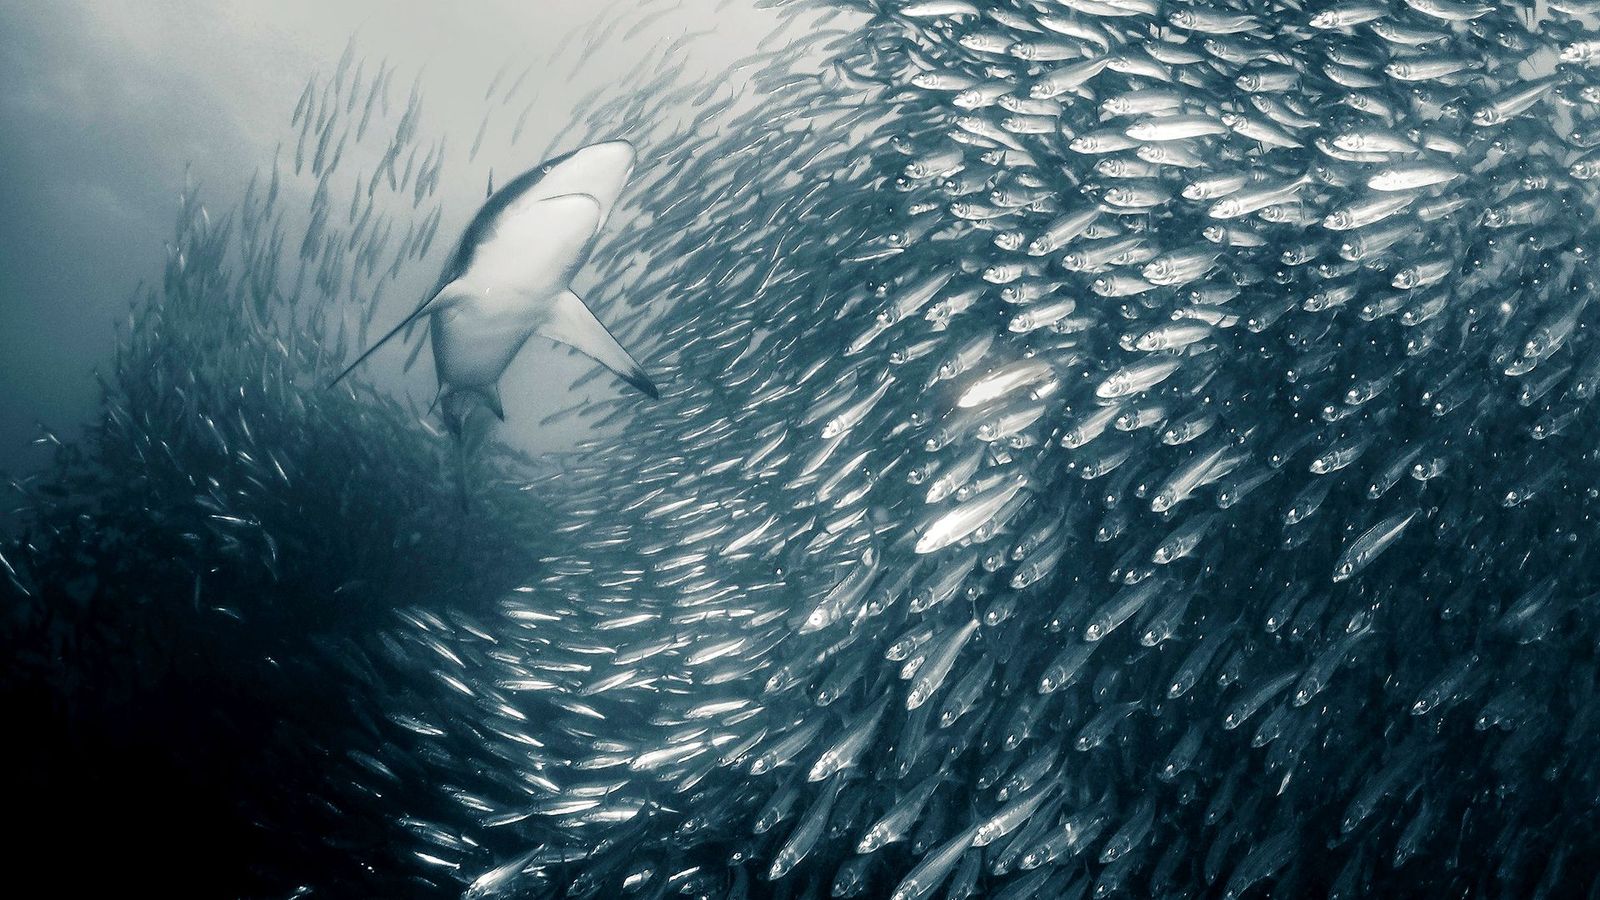 A bronze whaler shark feeds on sardines during the annual sardine run off the east coast of South Africa (Credit: Alamy)